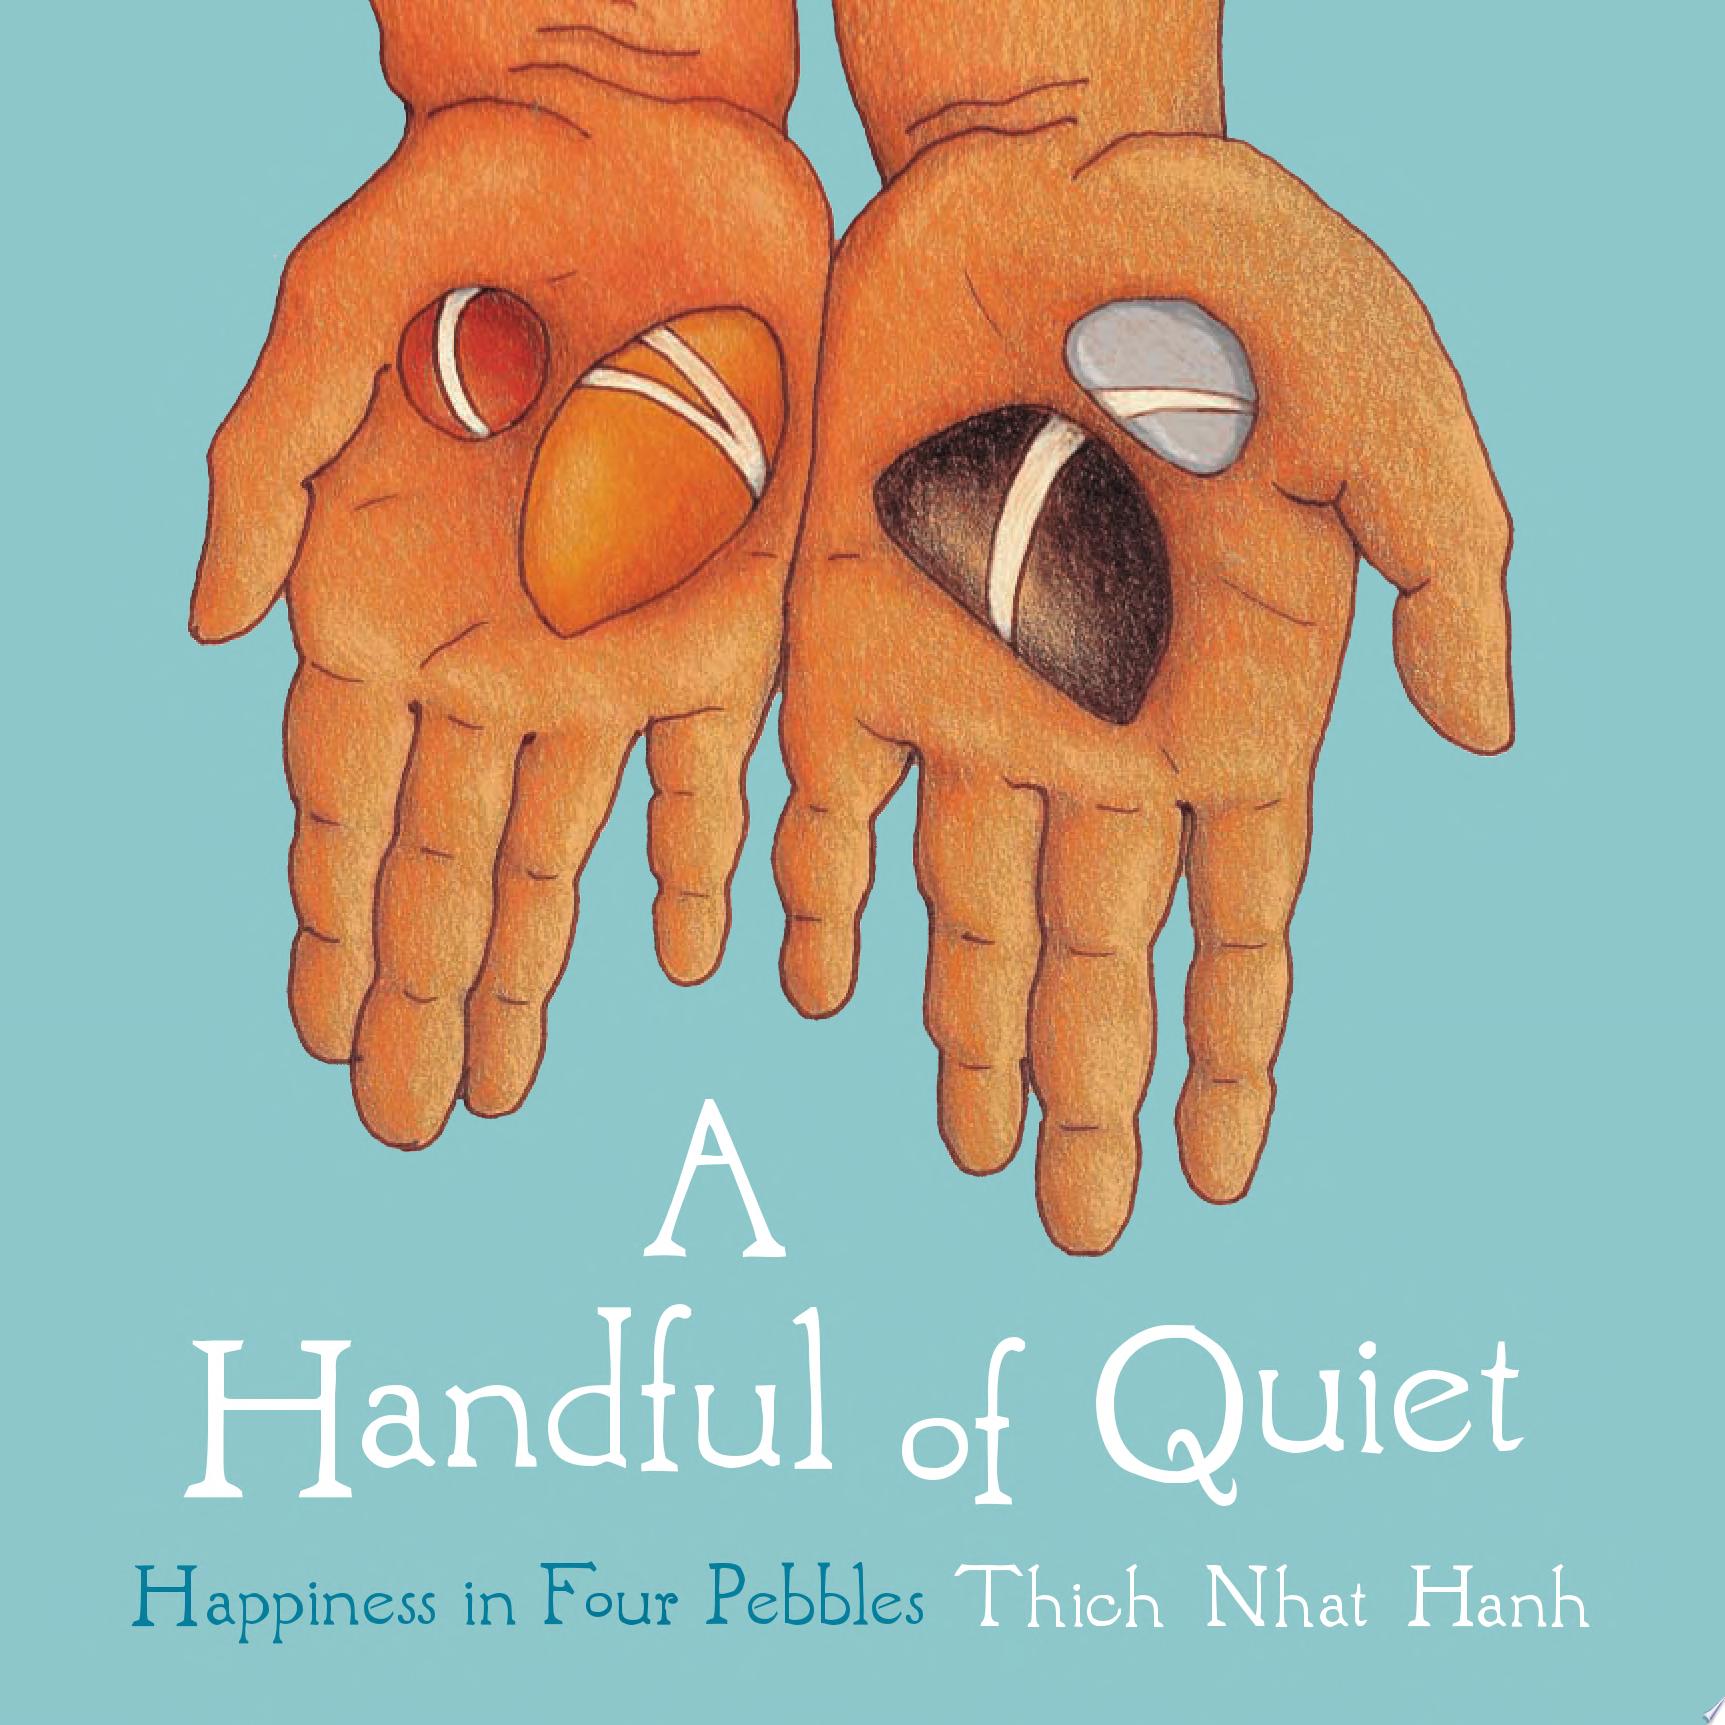 Image for "A Handful of Quiet"